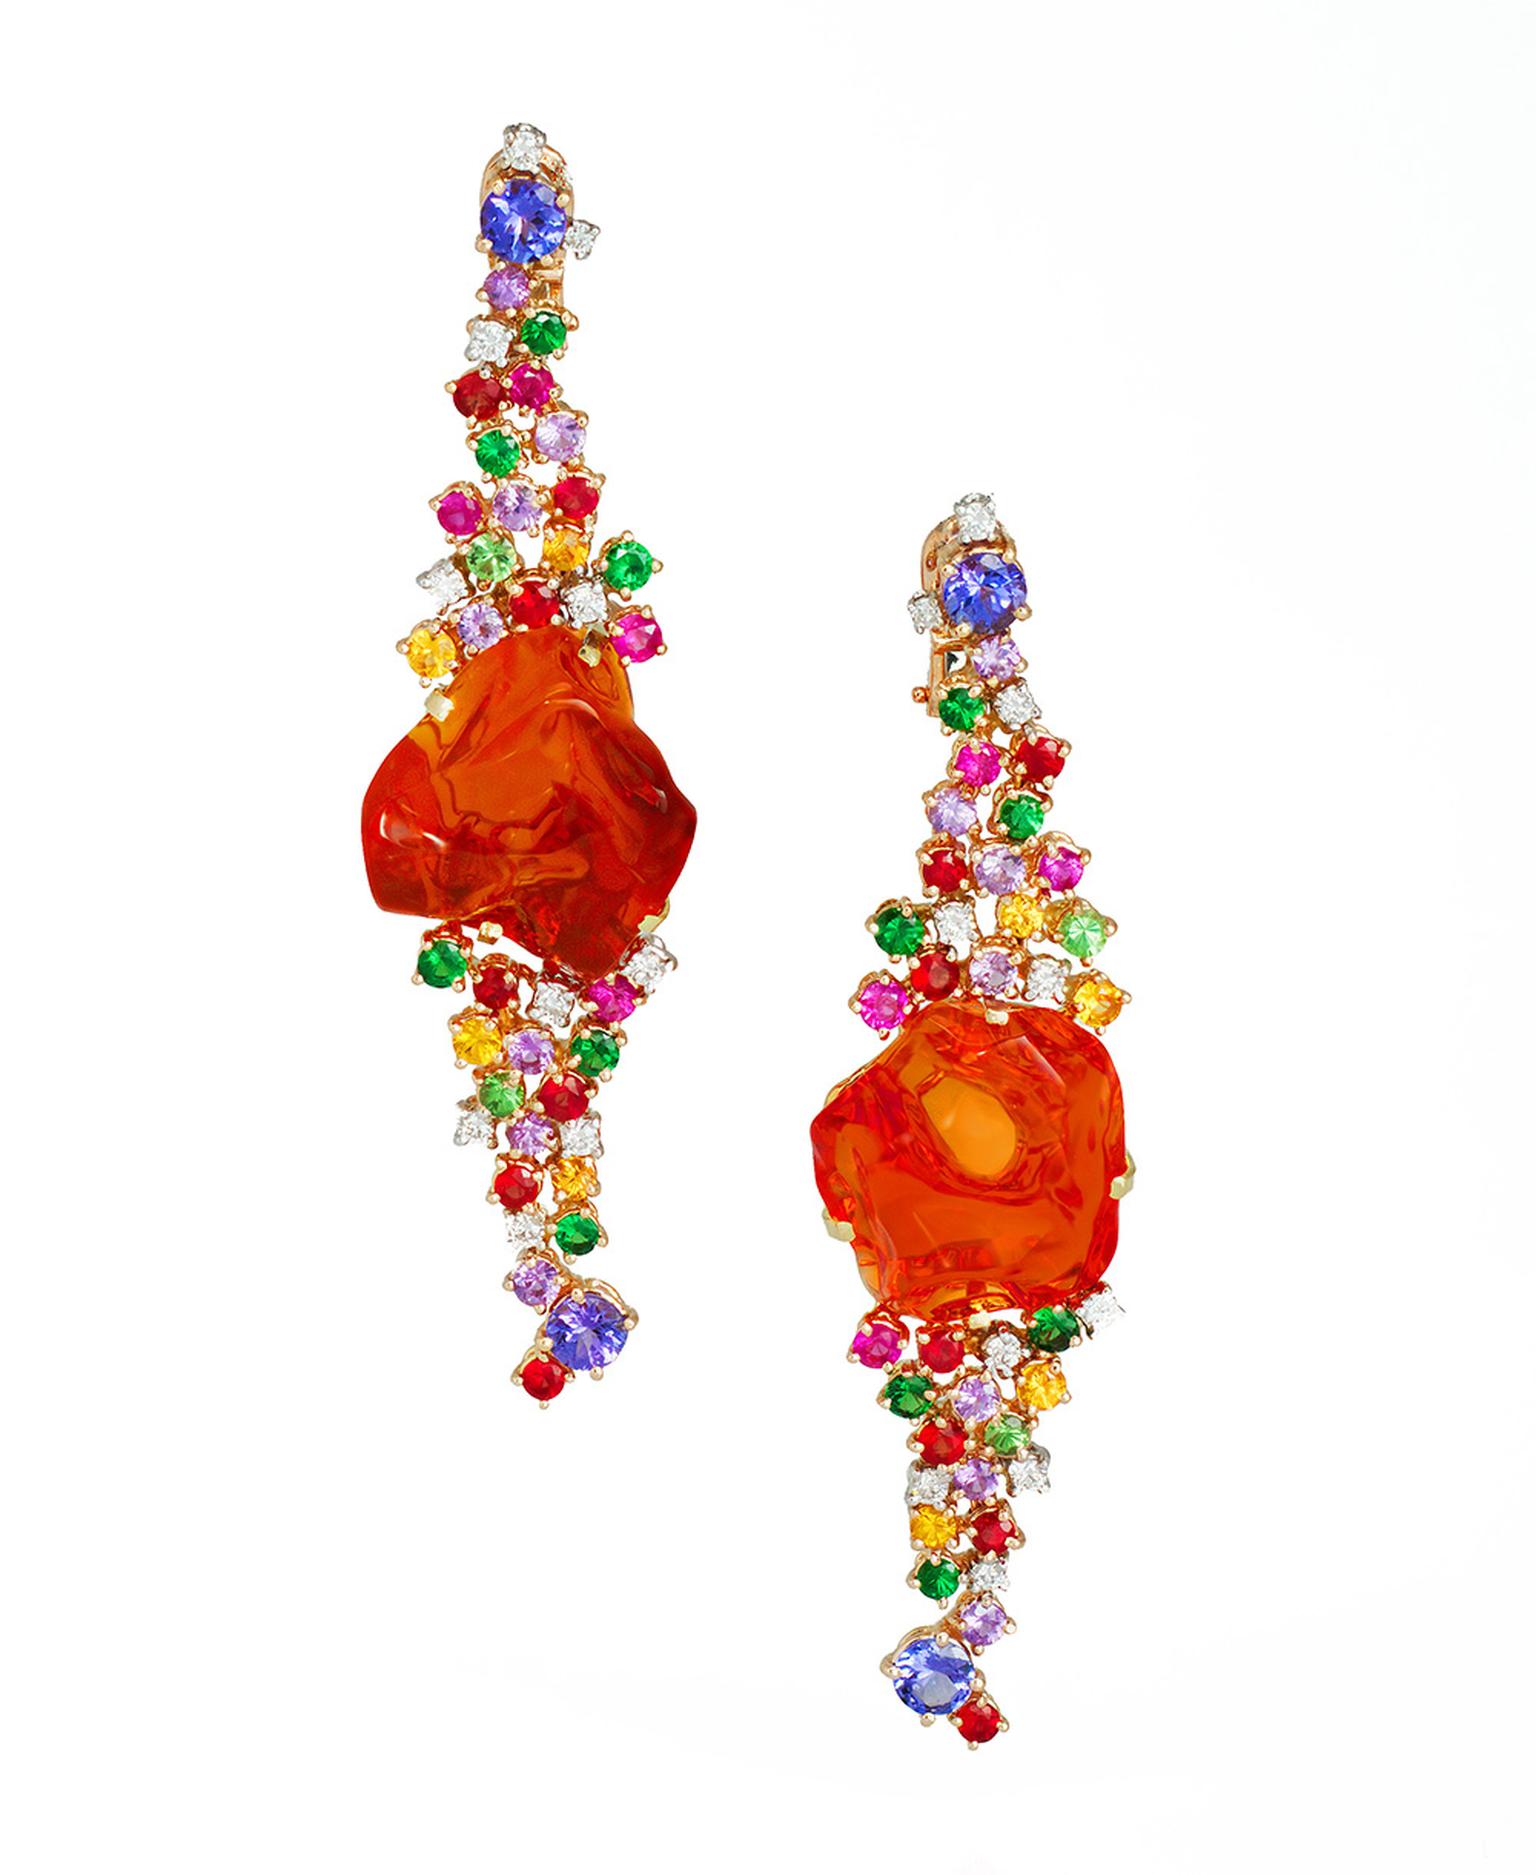 Fire opal jewellery glows with an inner fire saturated with every hue of red and orange